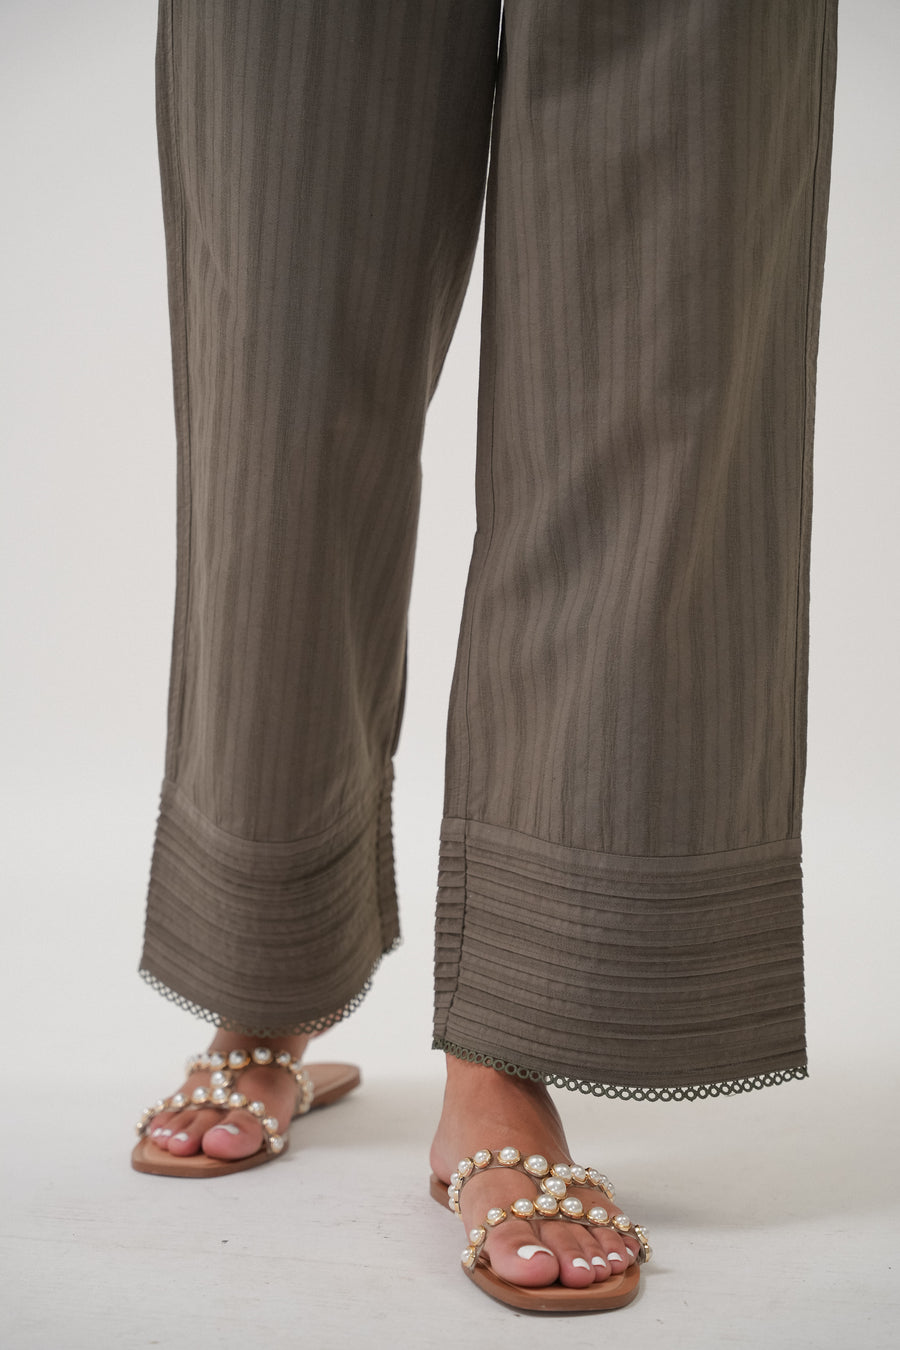 Lalitha Pleated Pants in Olive